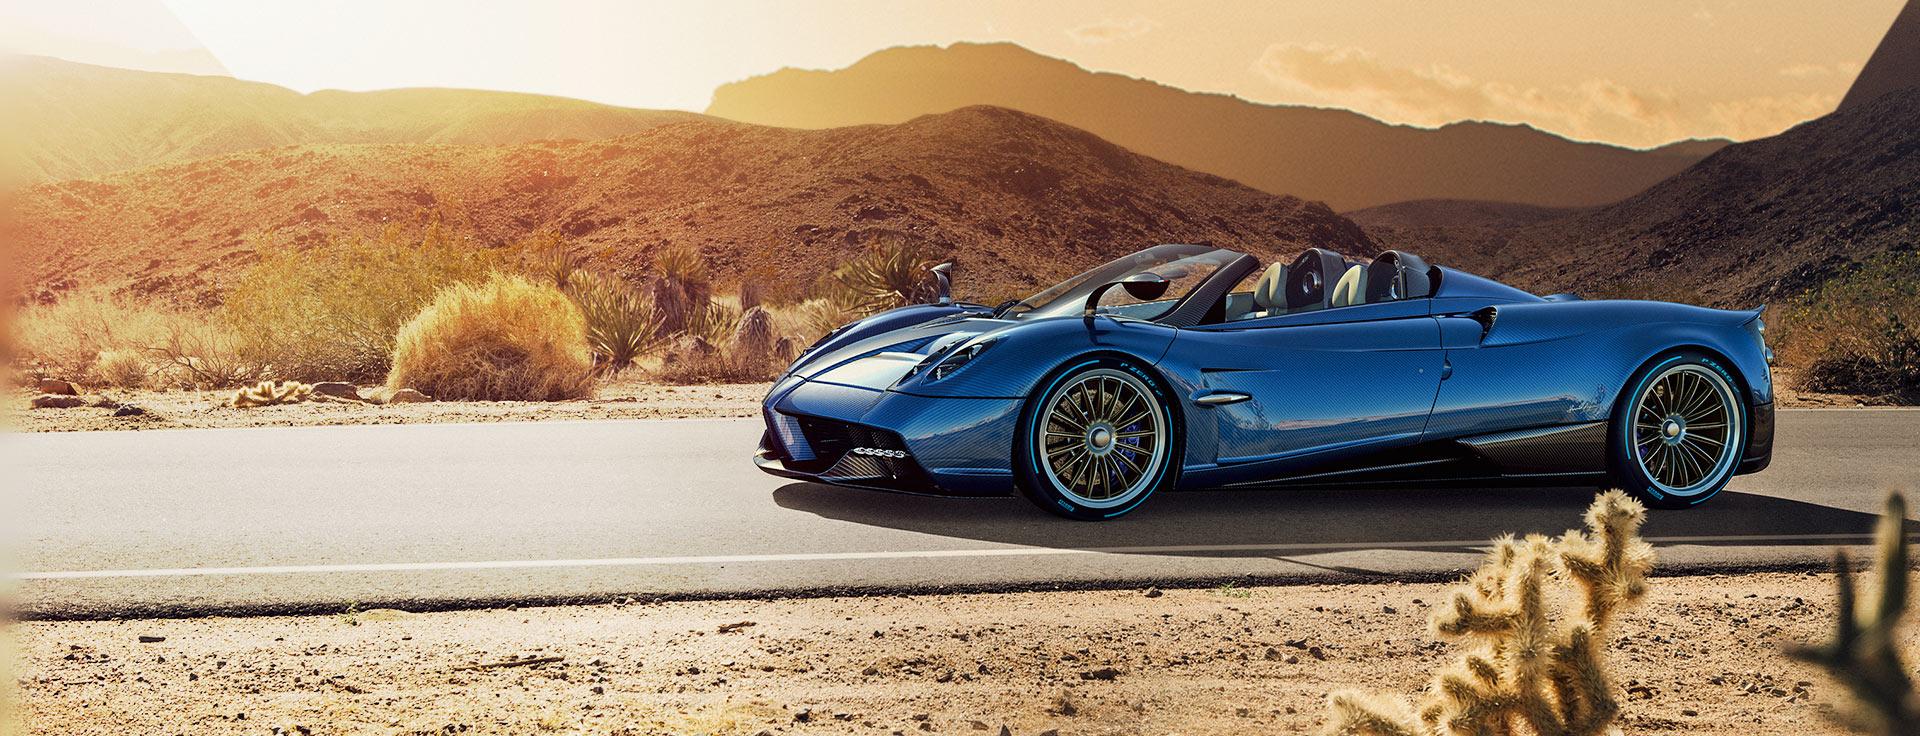 Pagani - Passion: added value capable of generating real emotion